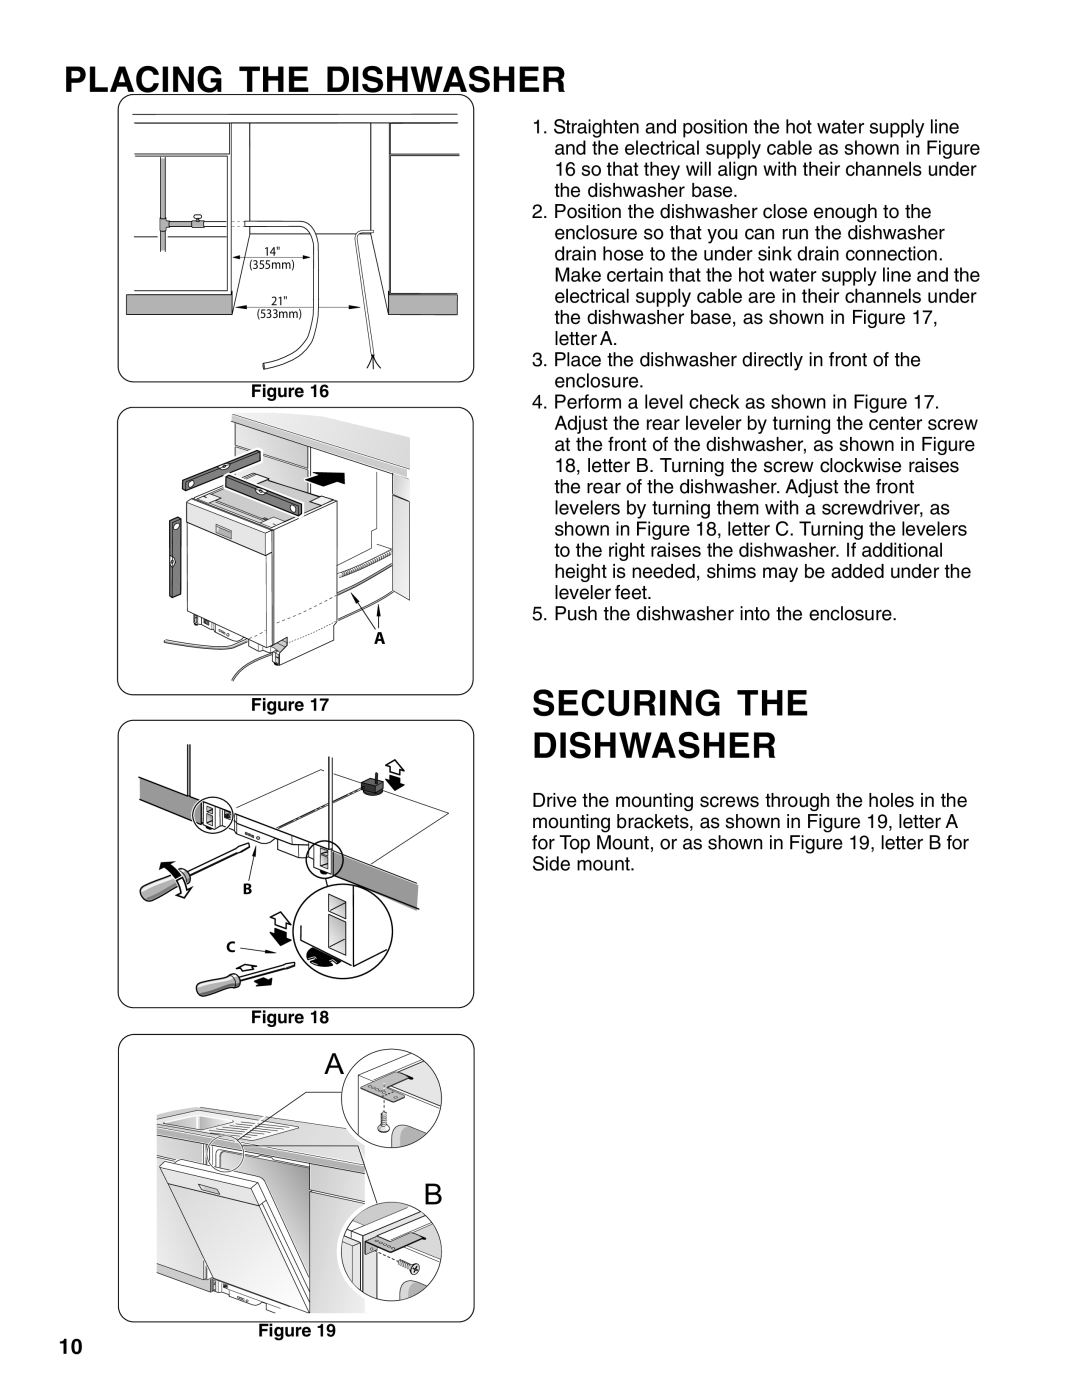 Thermador 9000039271 installation instructions Placing The Dishwasher, Securing The Dishwasher 